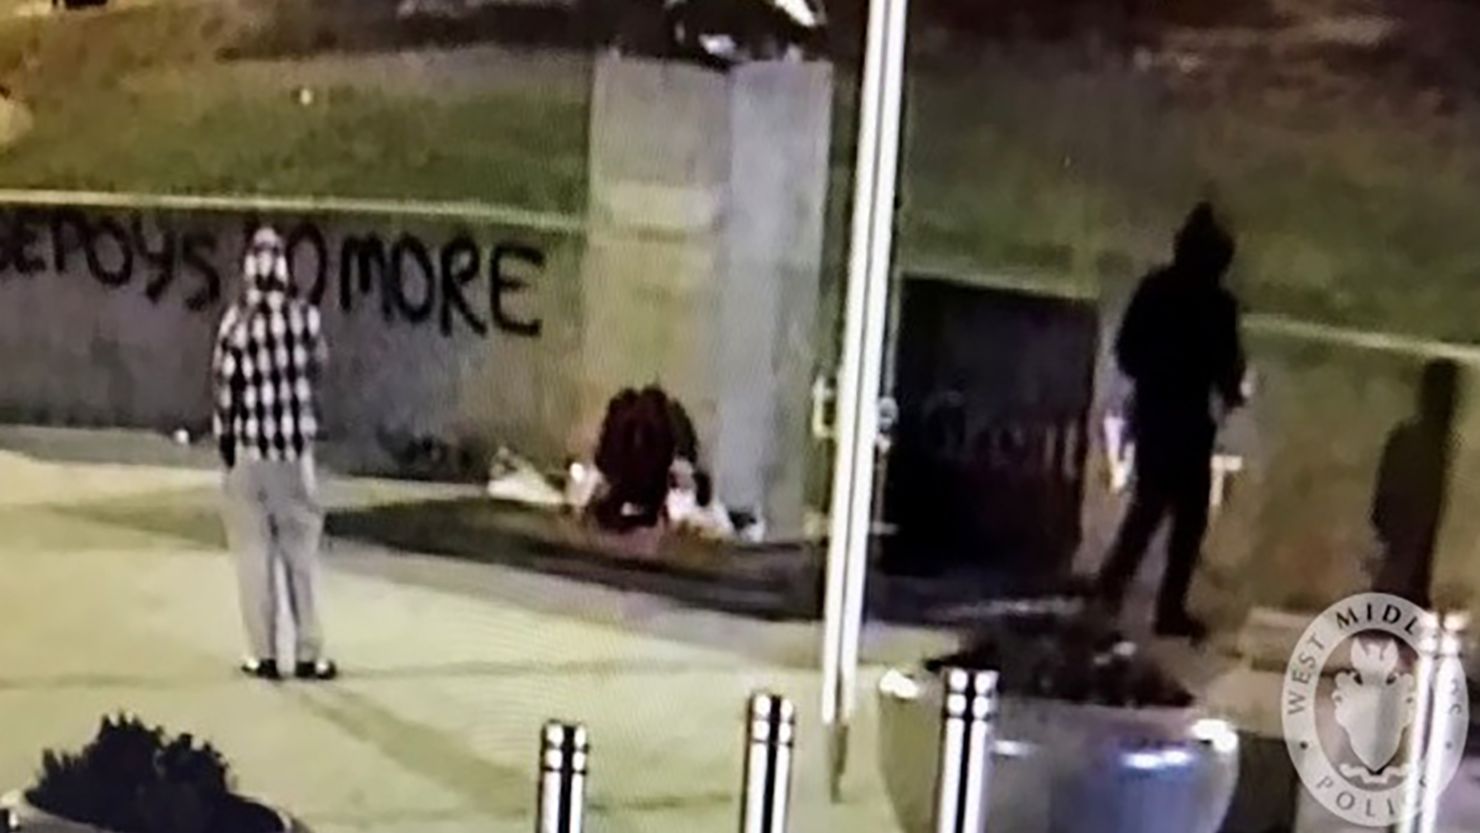 The security camera image released by police shows two alleged vandals by the statue on Friday morning.